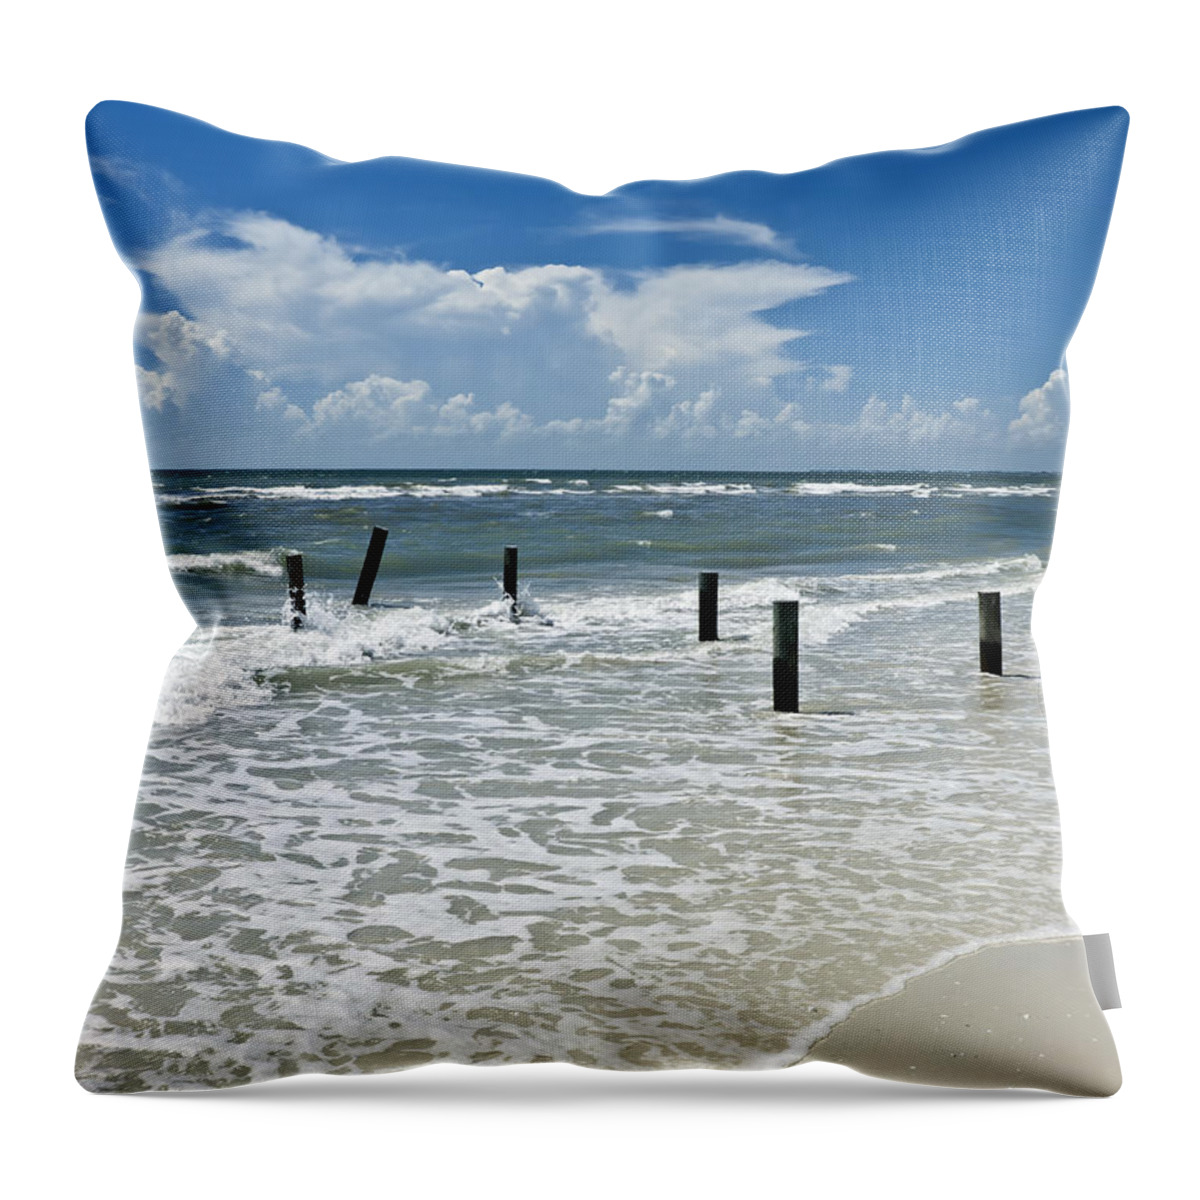 Wooden Post Throw Pillow featuring the photograph Isn't life wonderful? by Melanie Viola